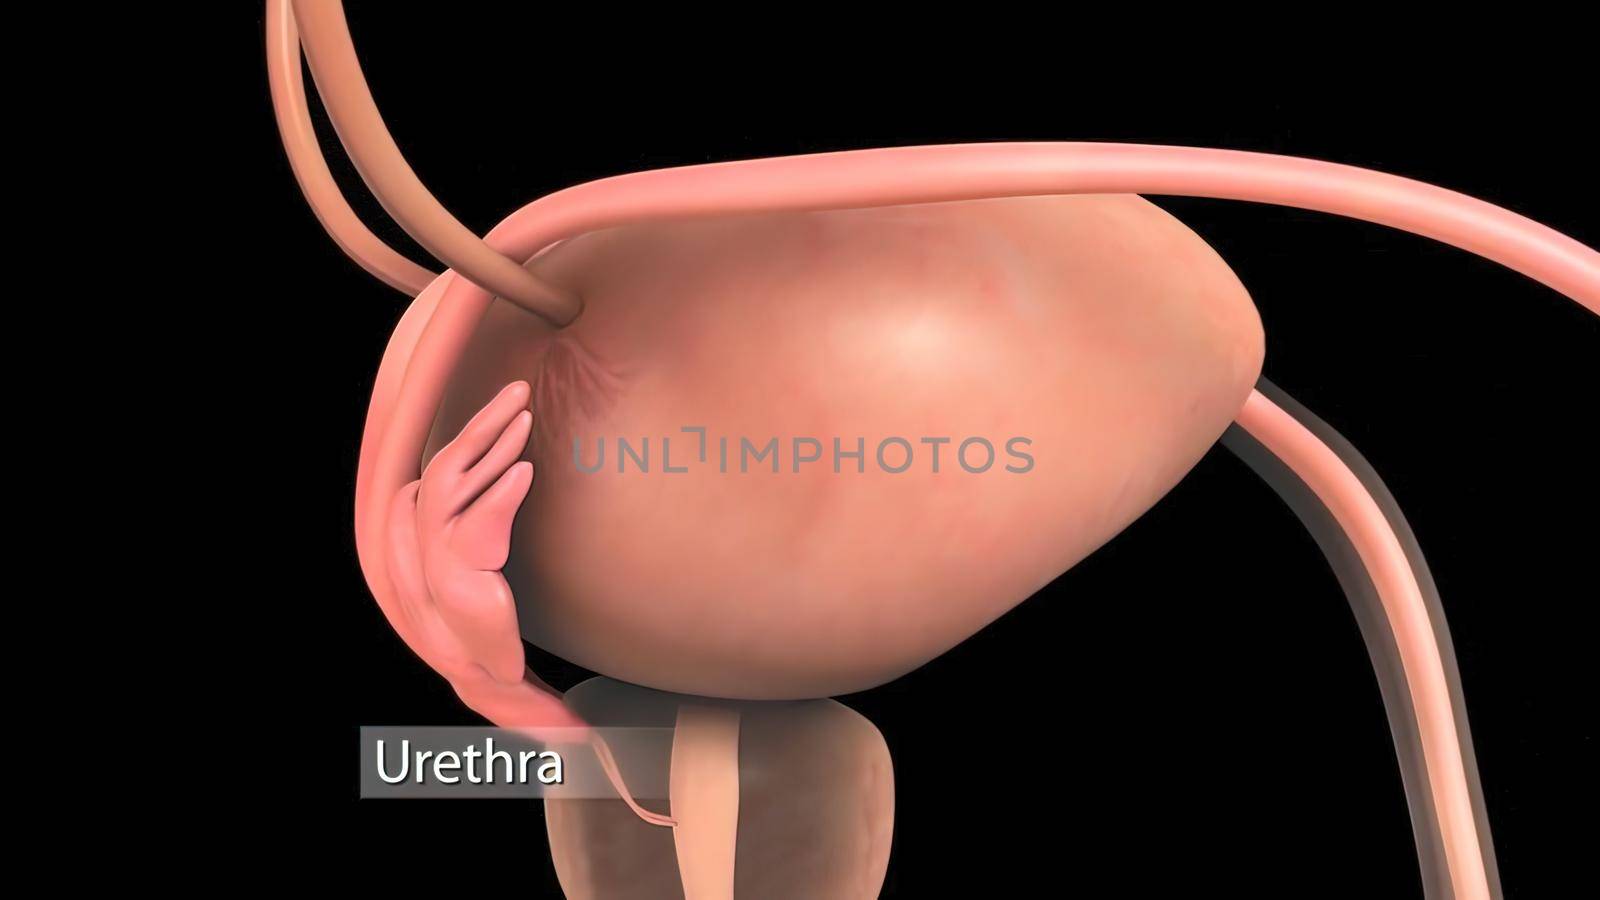 Human Gall Bladder Anatomy With Digestive System For Medical Concept. 3D Illustration